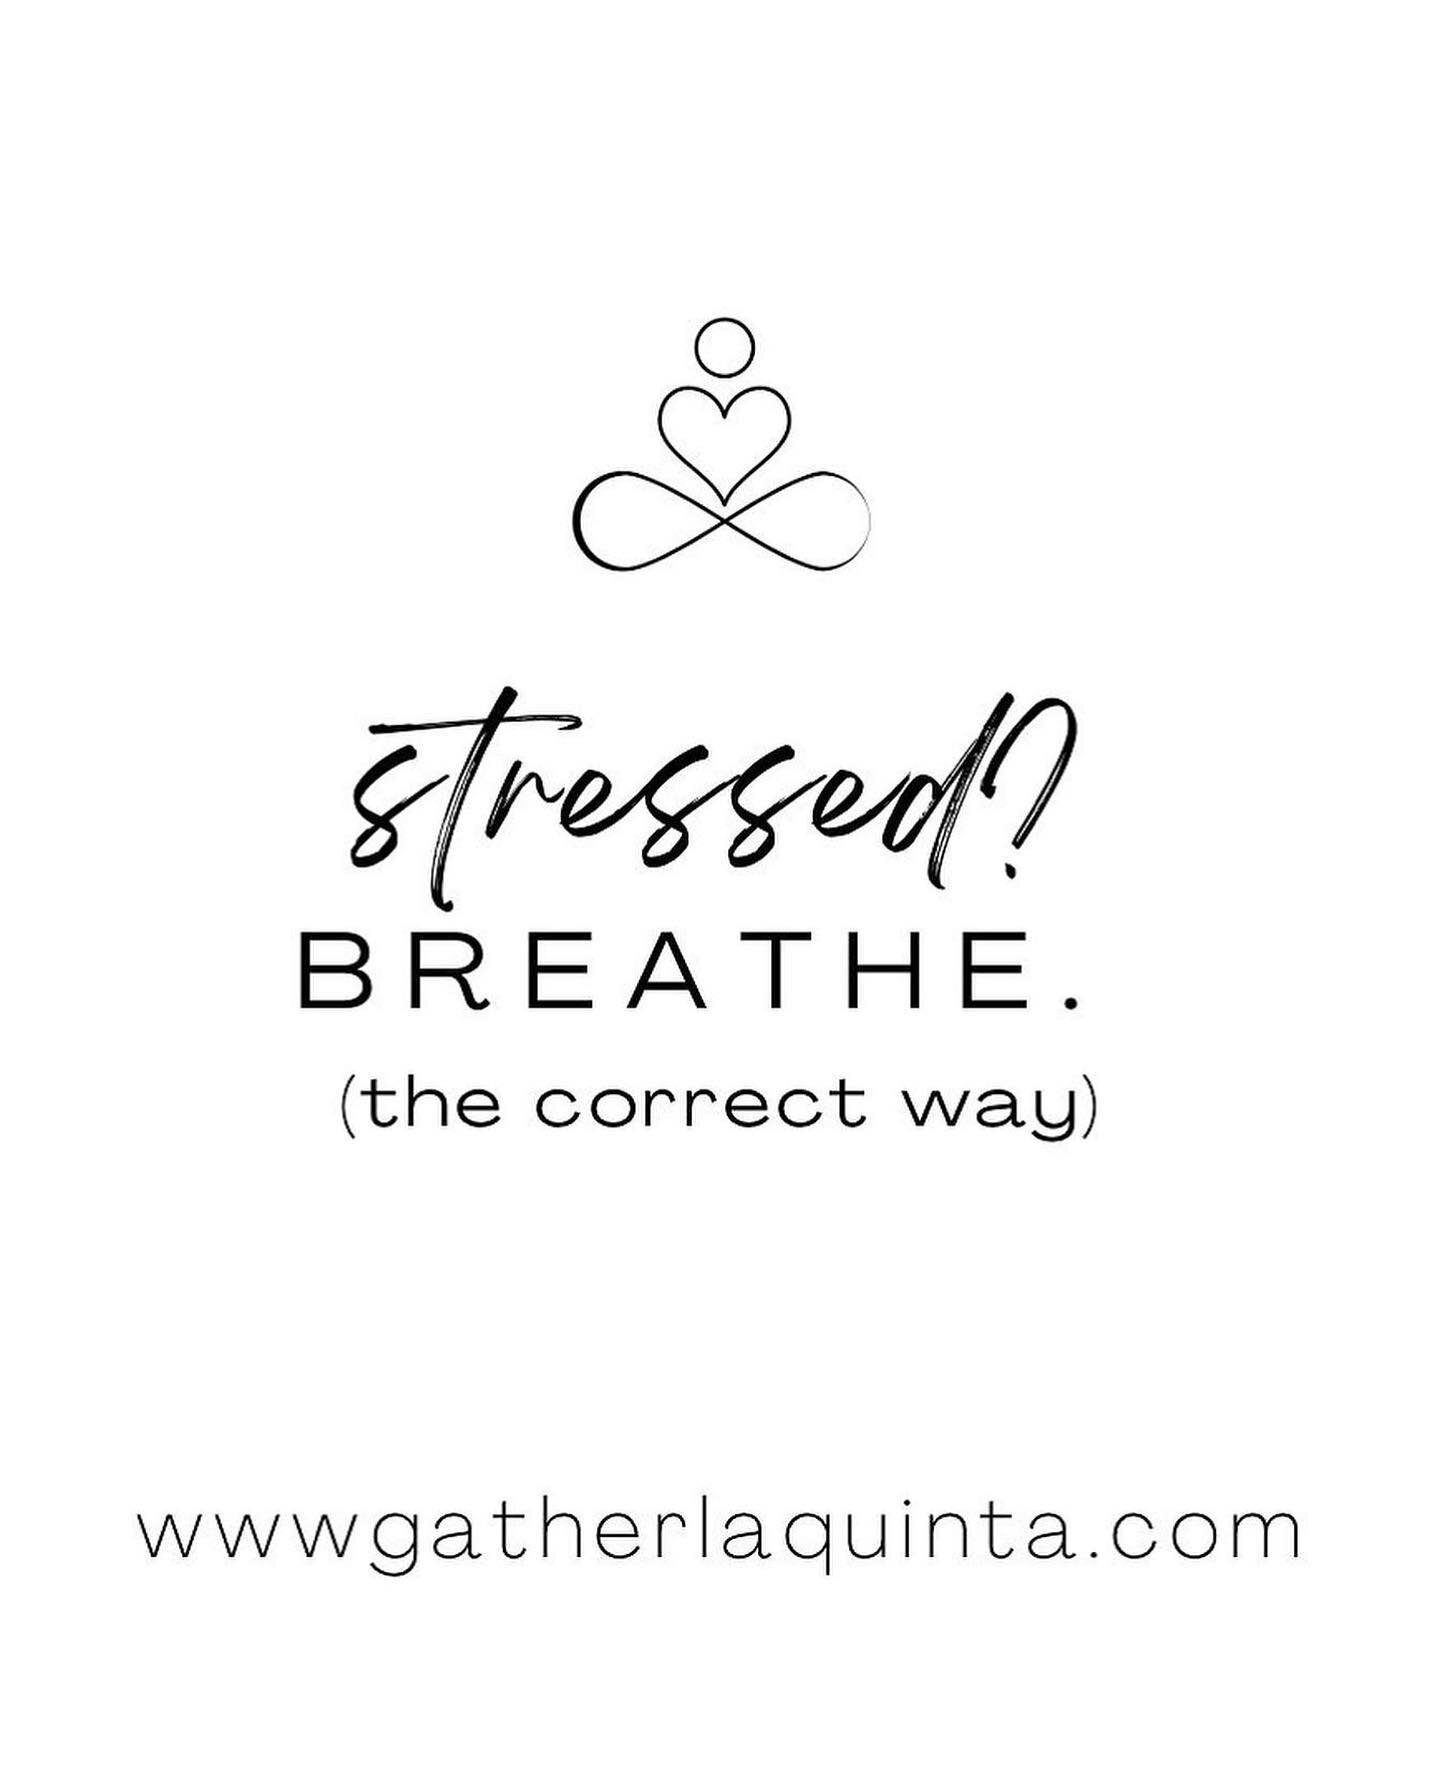 #mantramonday 

Just BREATHE. (the correct way to reduce stress.)
Excerpt from @hubermanlab via @mindbodygreen 

&ldquo;Try as we might, sometimes there's just no avoiding stress. The good news is, there are plenty of calming techniques you can do wh